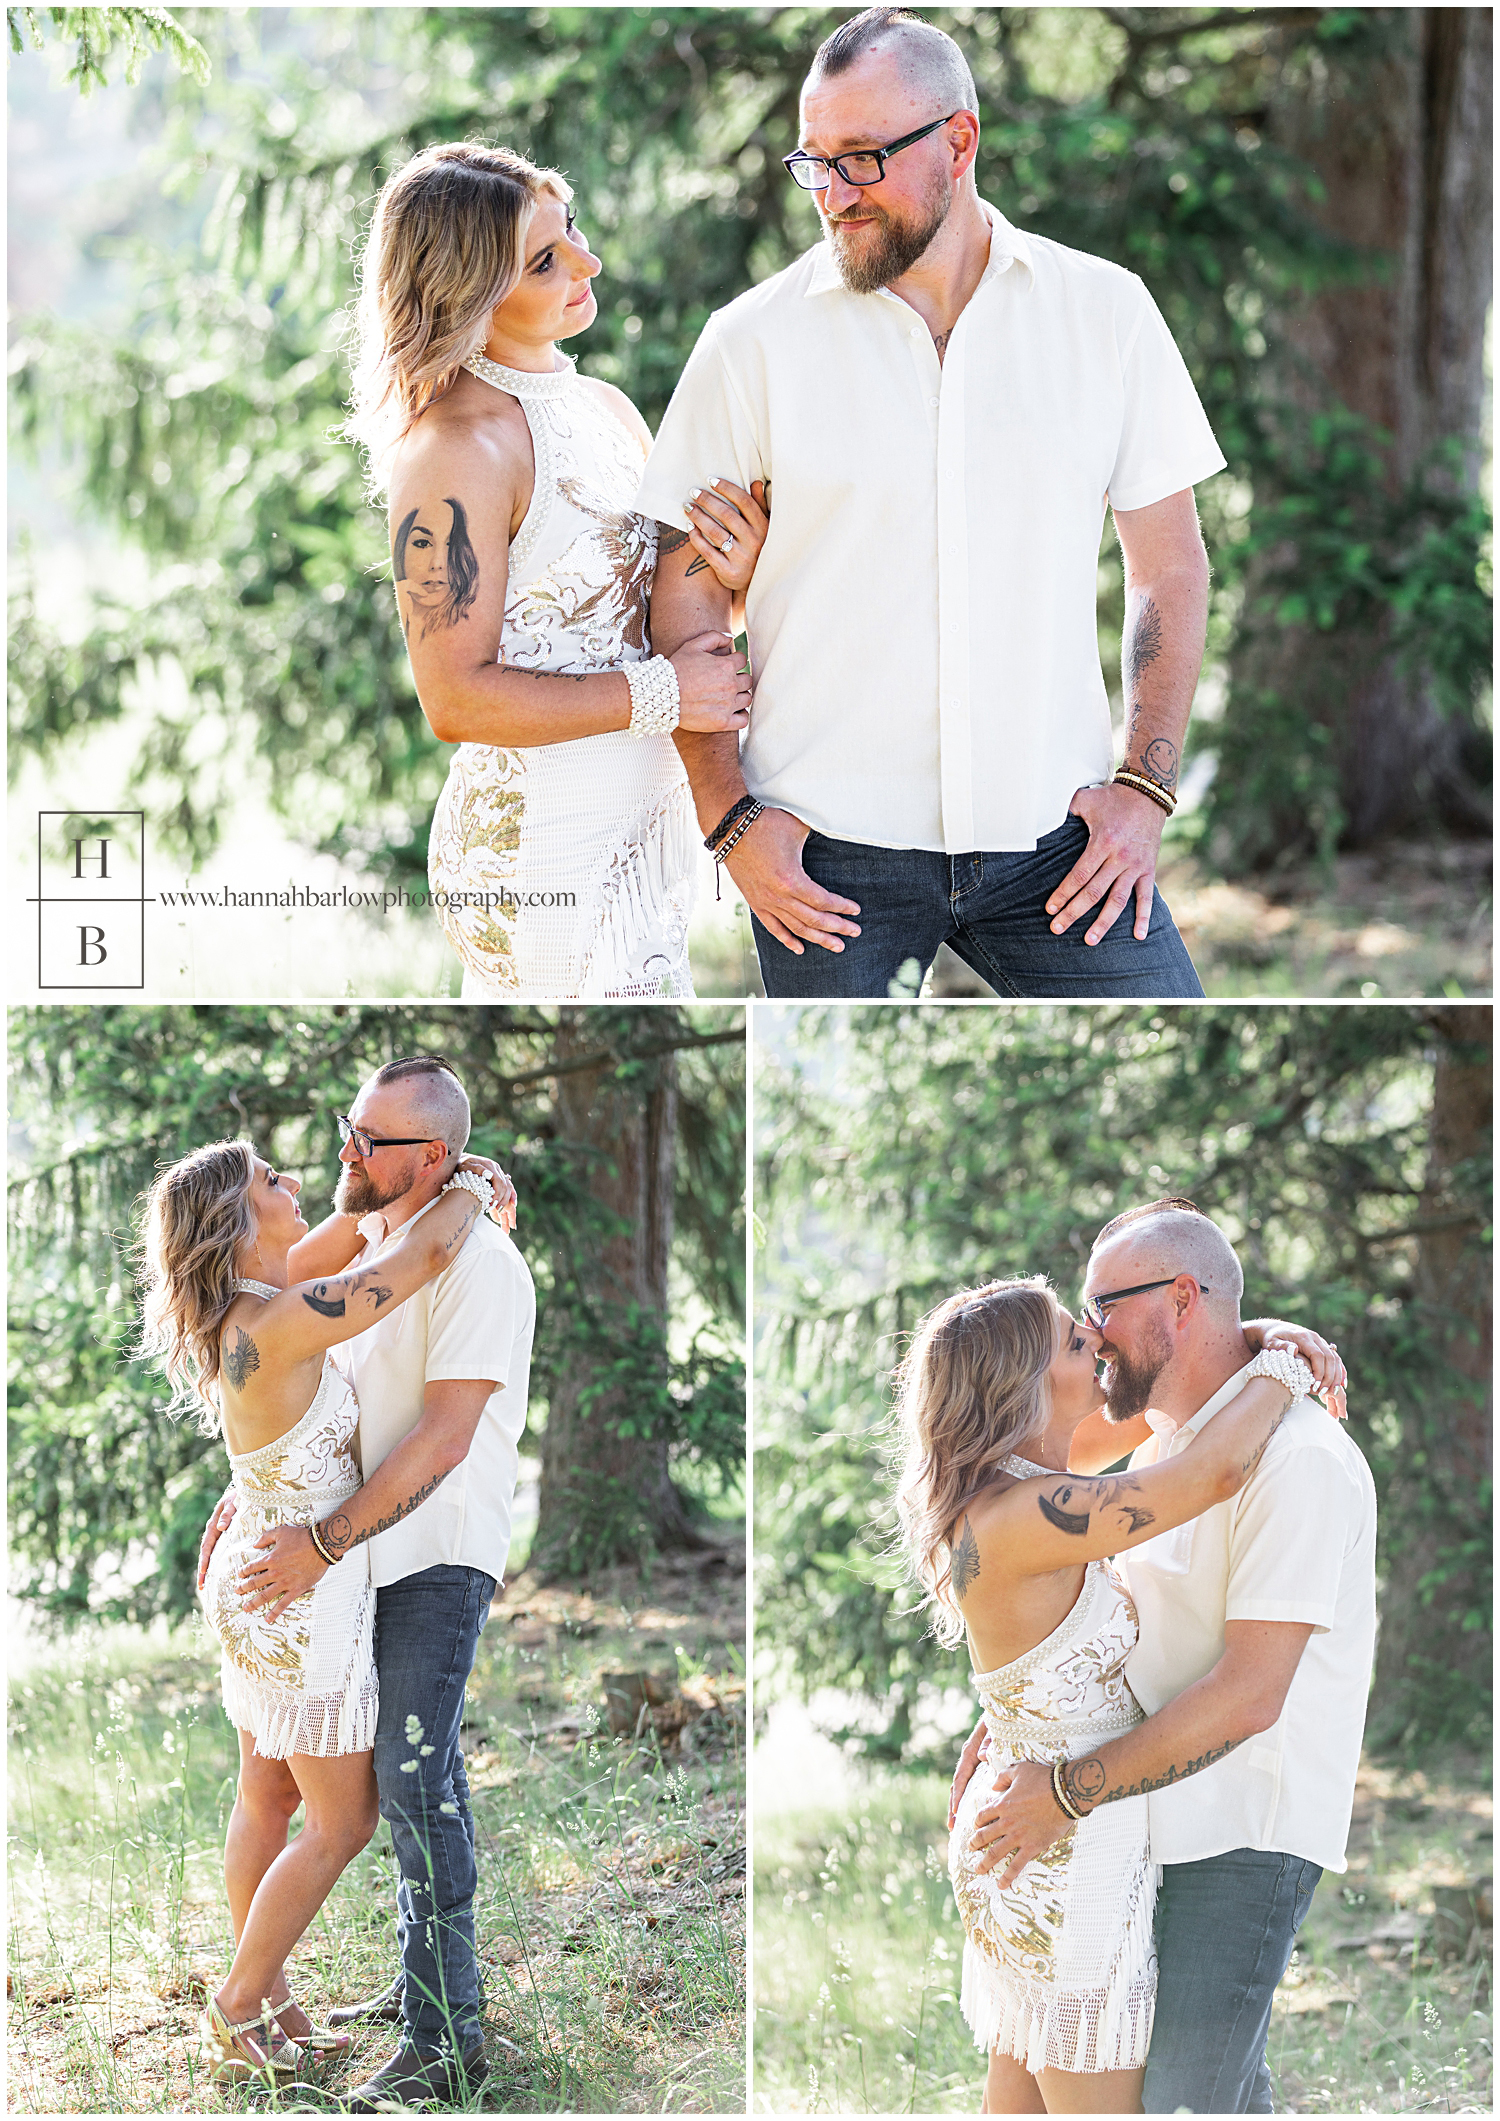 Couple poses in pine trees with warm glow of sun for engagement photos.